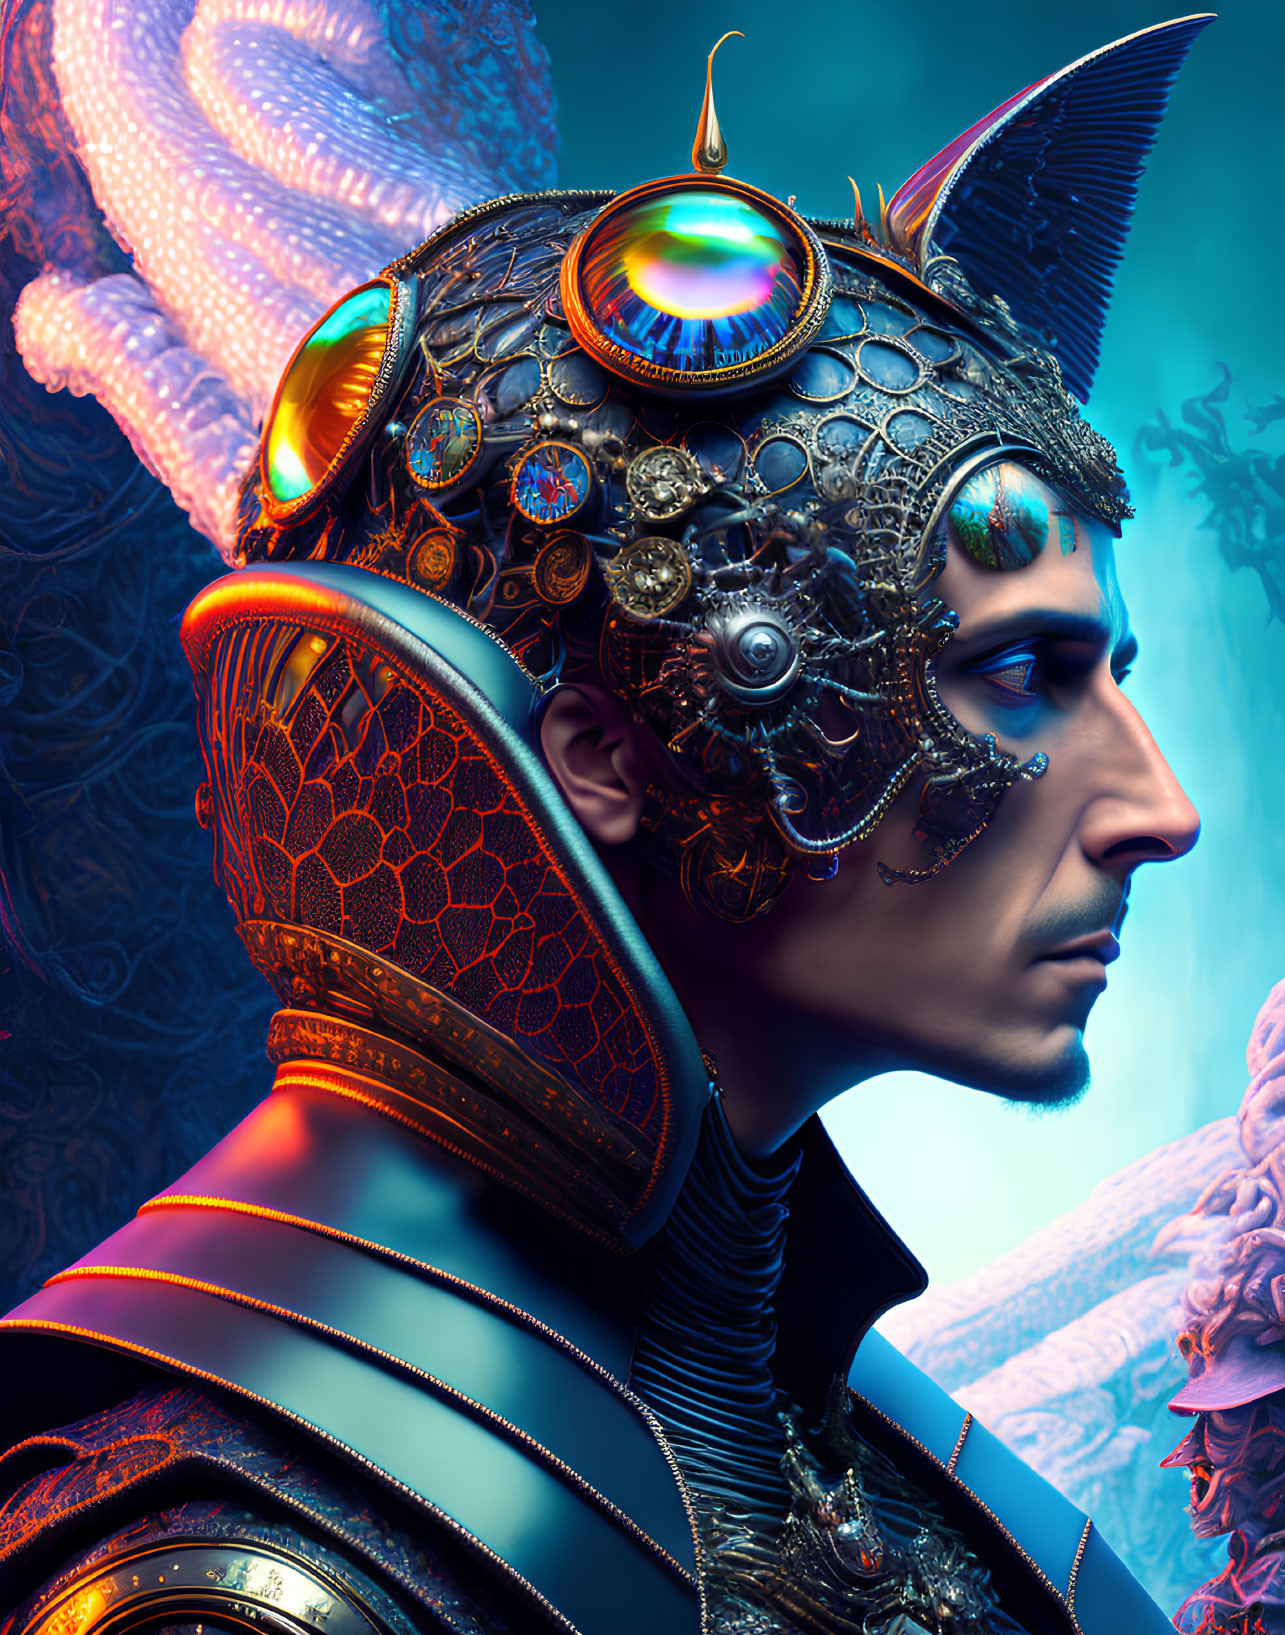 Profile view of person with futuristic ornate headgear against blue backdrop